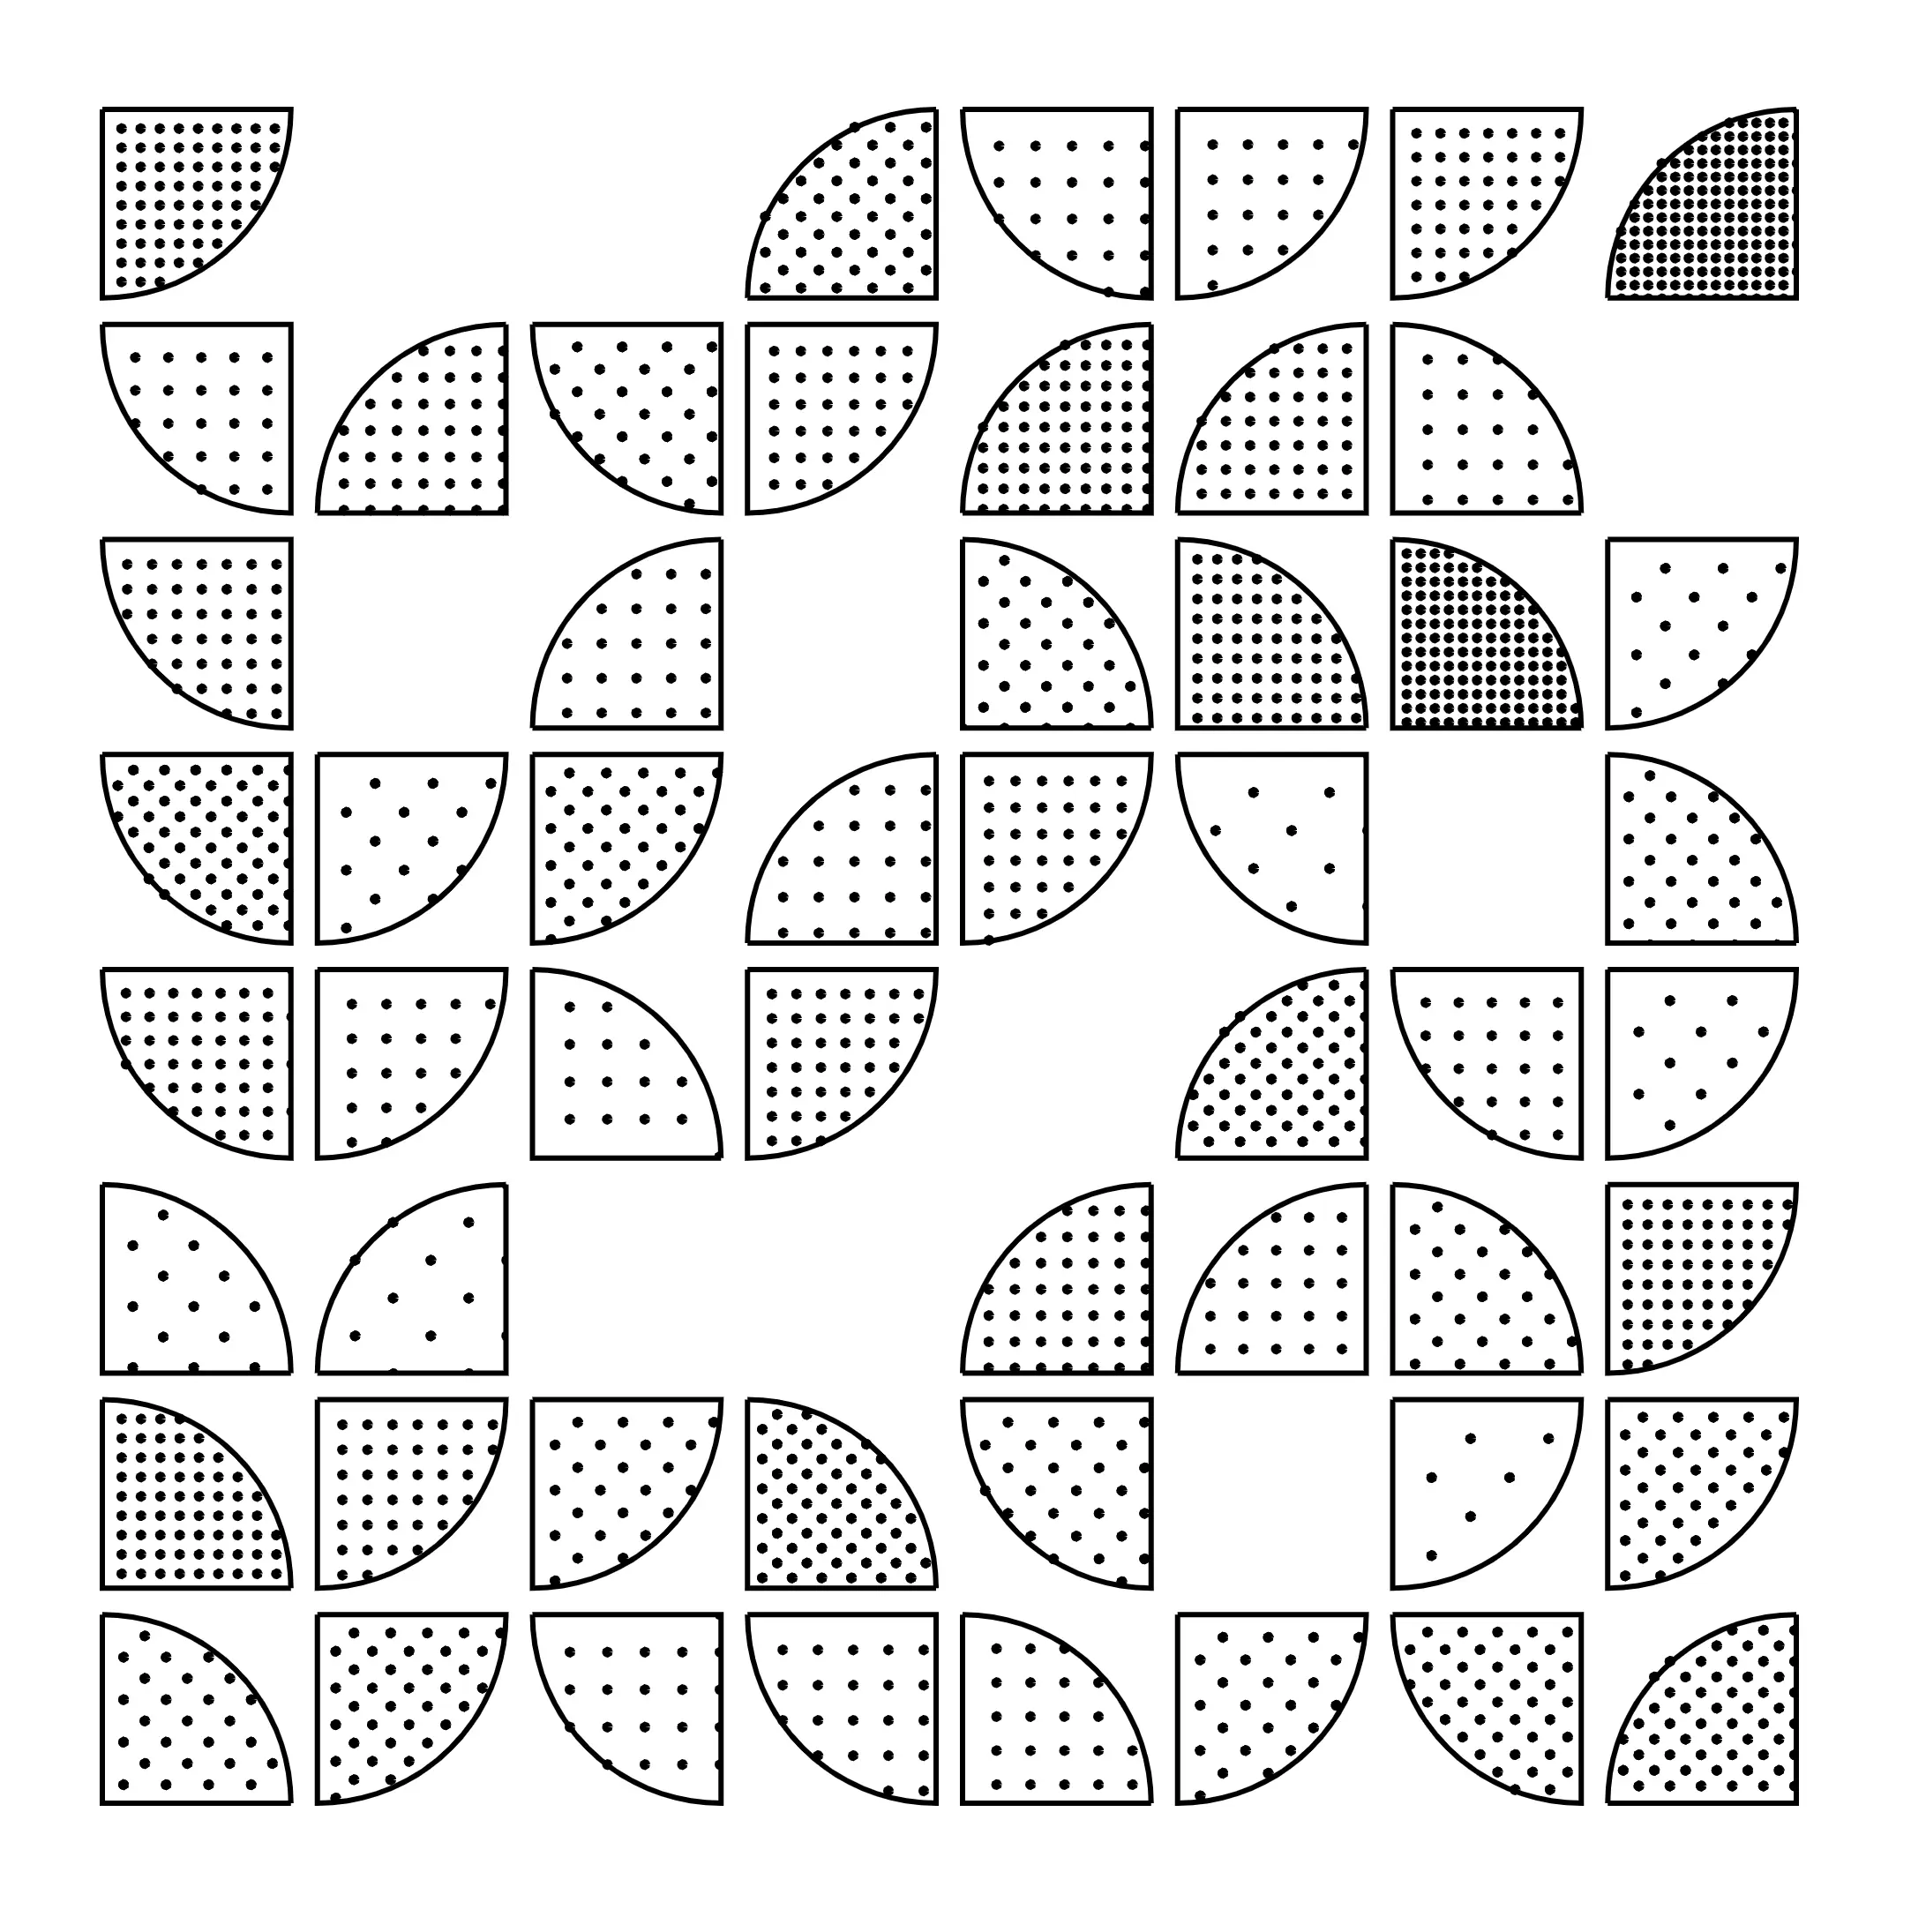 a grid of 8x8 cells, where each cell is a quarter of a circle, in any of the 4 orientations, filled with a grid of dots